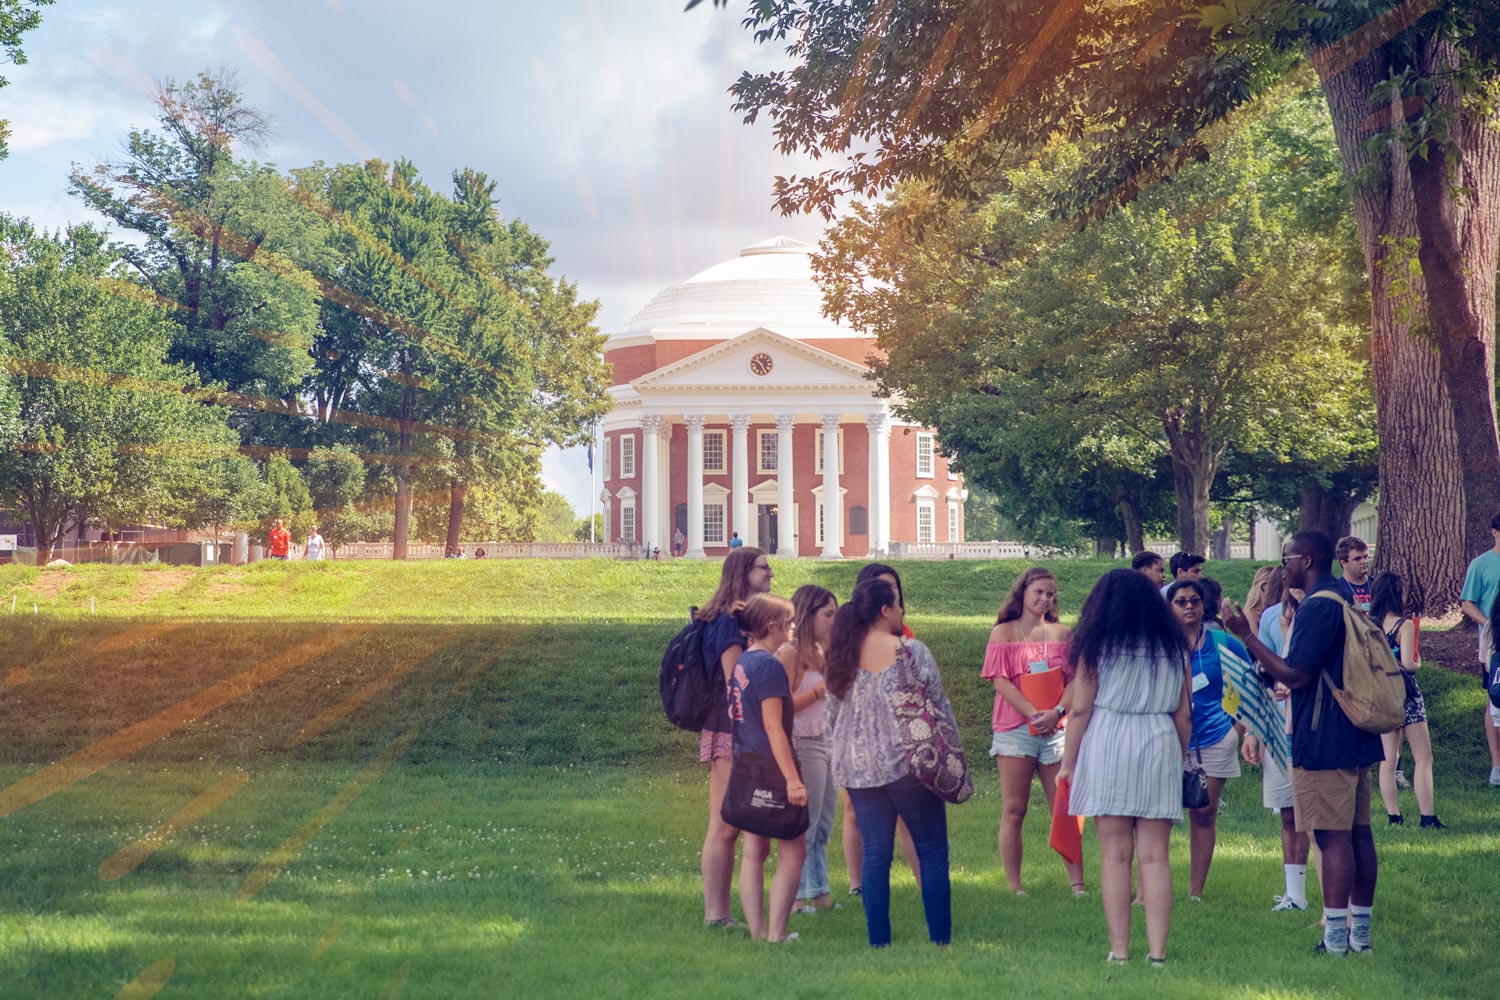 Students gather on the grass in front of the Rotunda